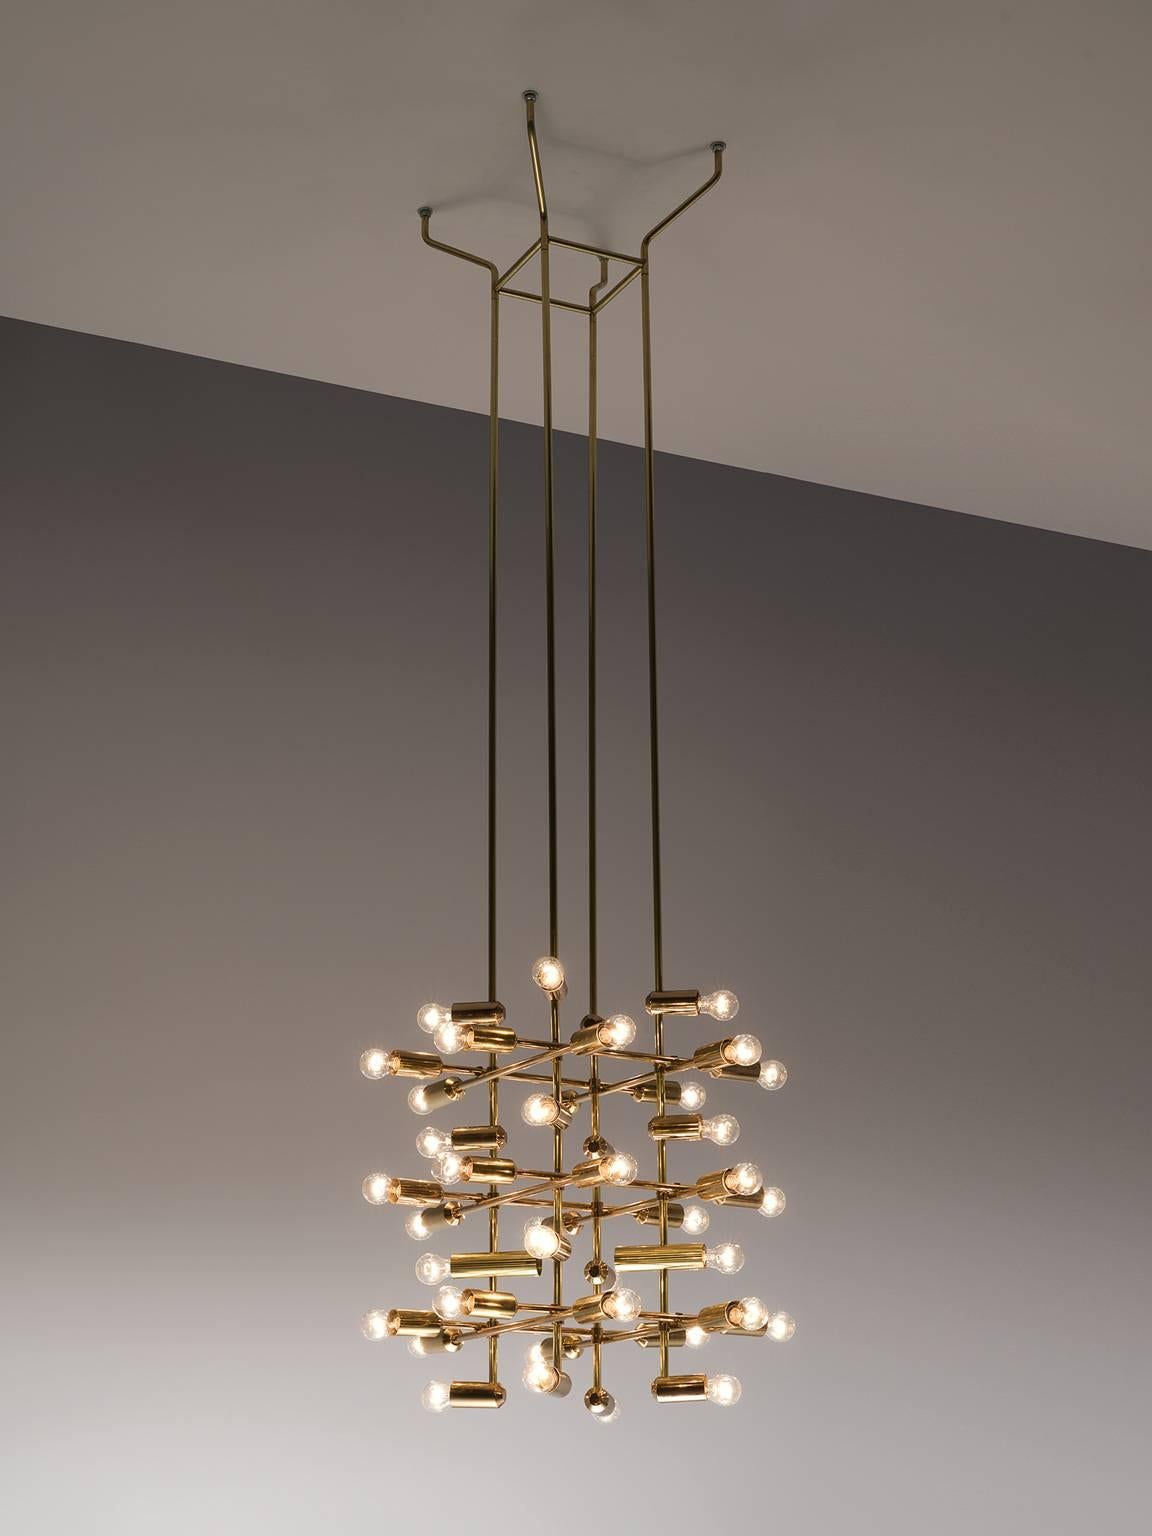 Chandelier brass, 1960s, Europe.

This set of 20 delicate chandeliers are Minimalist yet warm. Each light consists of forty light bulbs that are placed on the ends of brass horizontal beam. The beams form a cross-like pattern that is attached to the